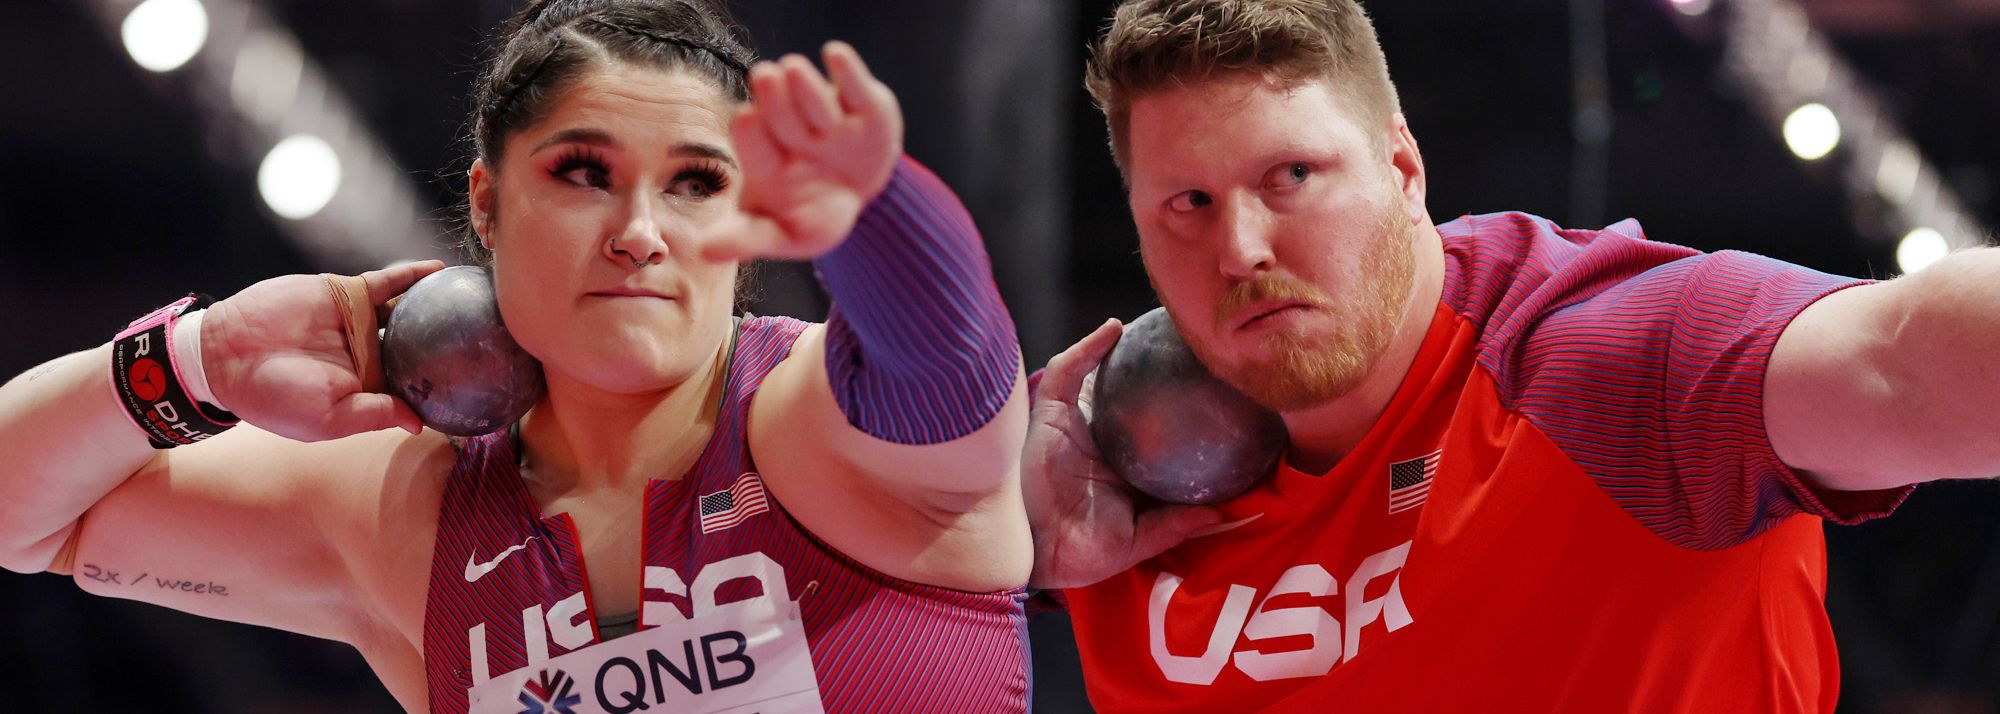 Expected highlights in the women's and men's shot put